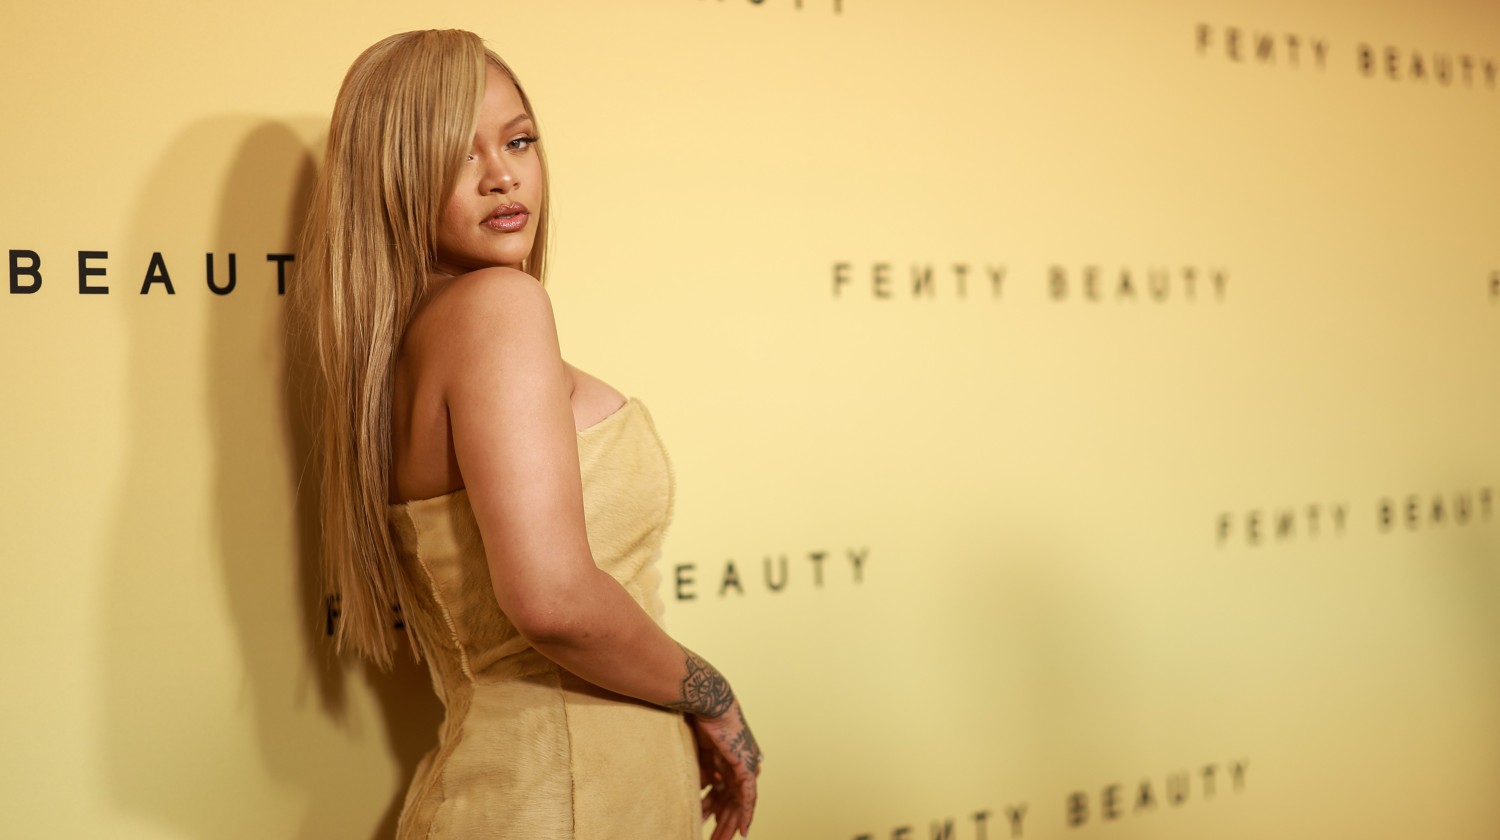 Rihanna attends her immersive beauty event in honor of Fenty Beauty's newest product launch, Soft'lit Naturally Luminous Longwear Foundation in Los Angeles. MATT WINKELMEYER/GETTY IMAGES